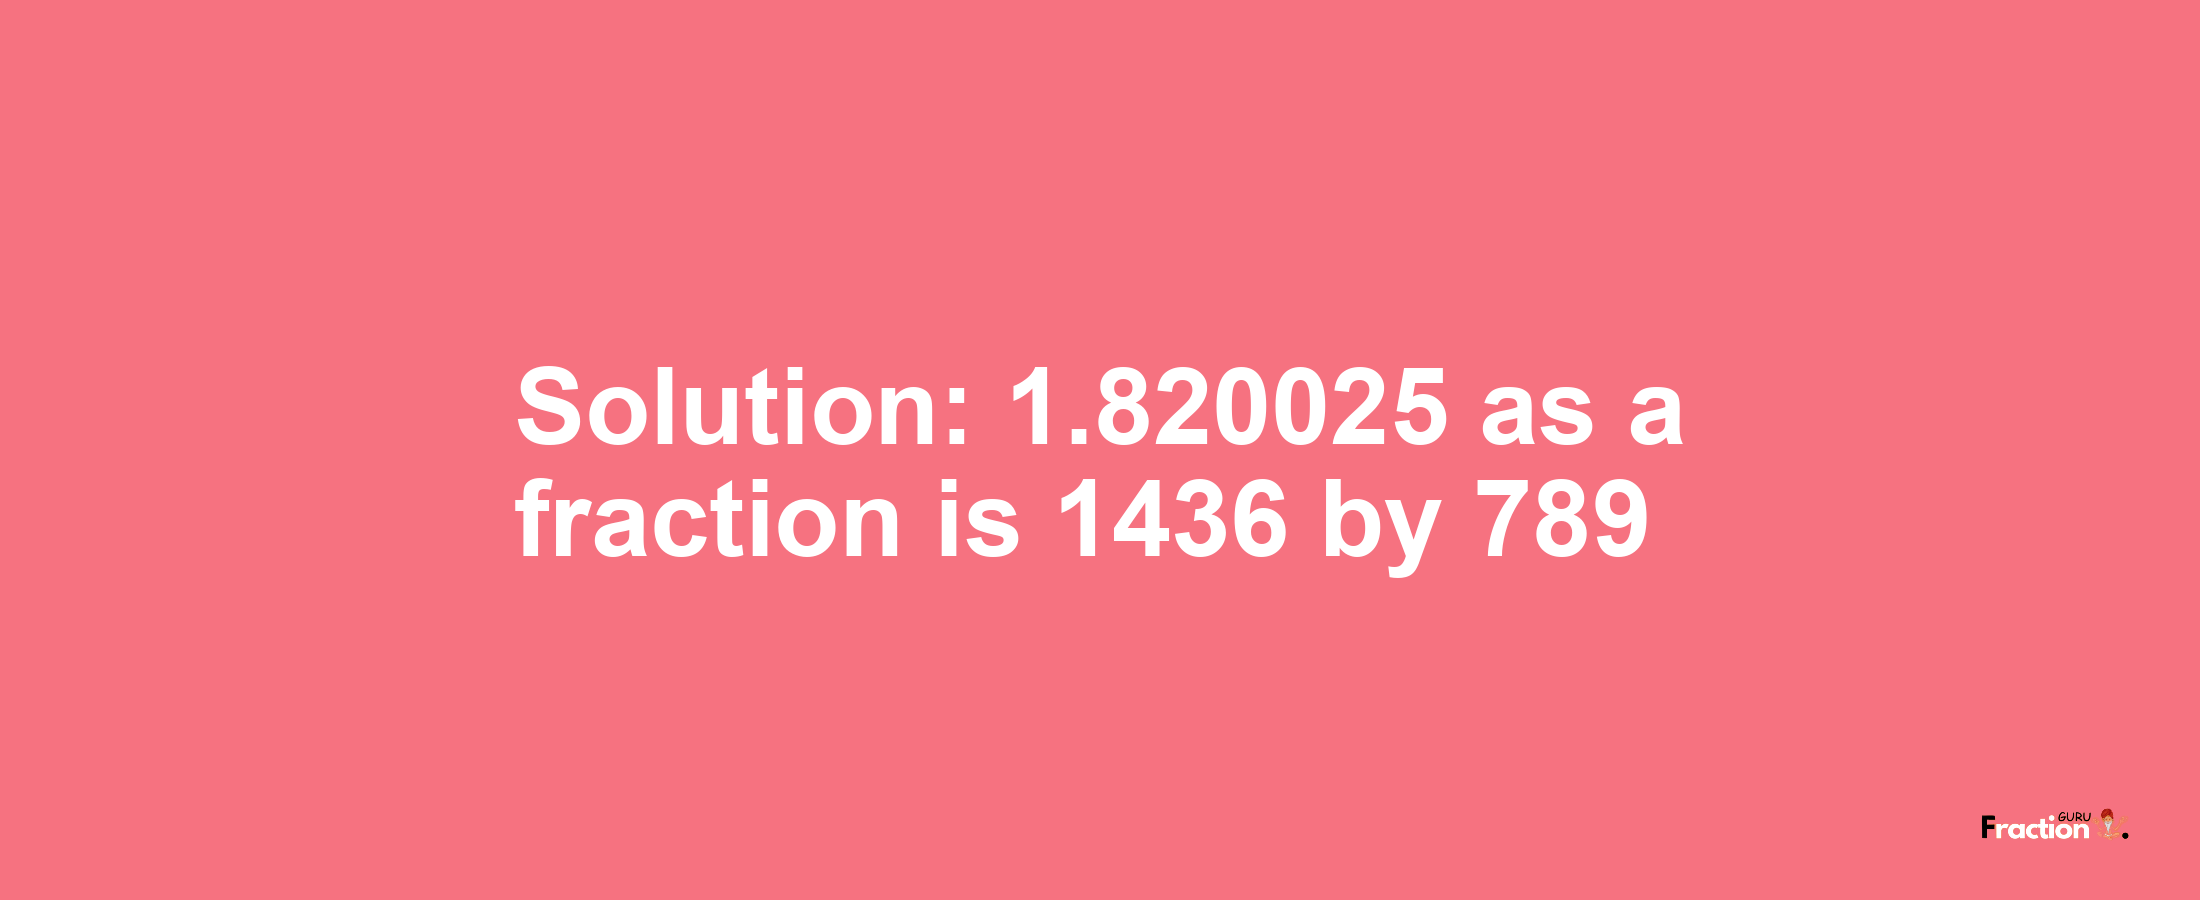 Solution:1.820025 as a fraction is 1436/789